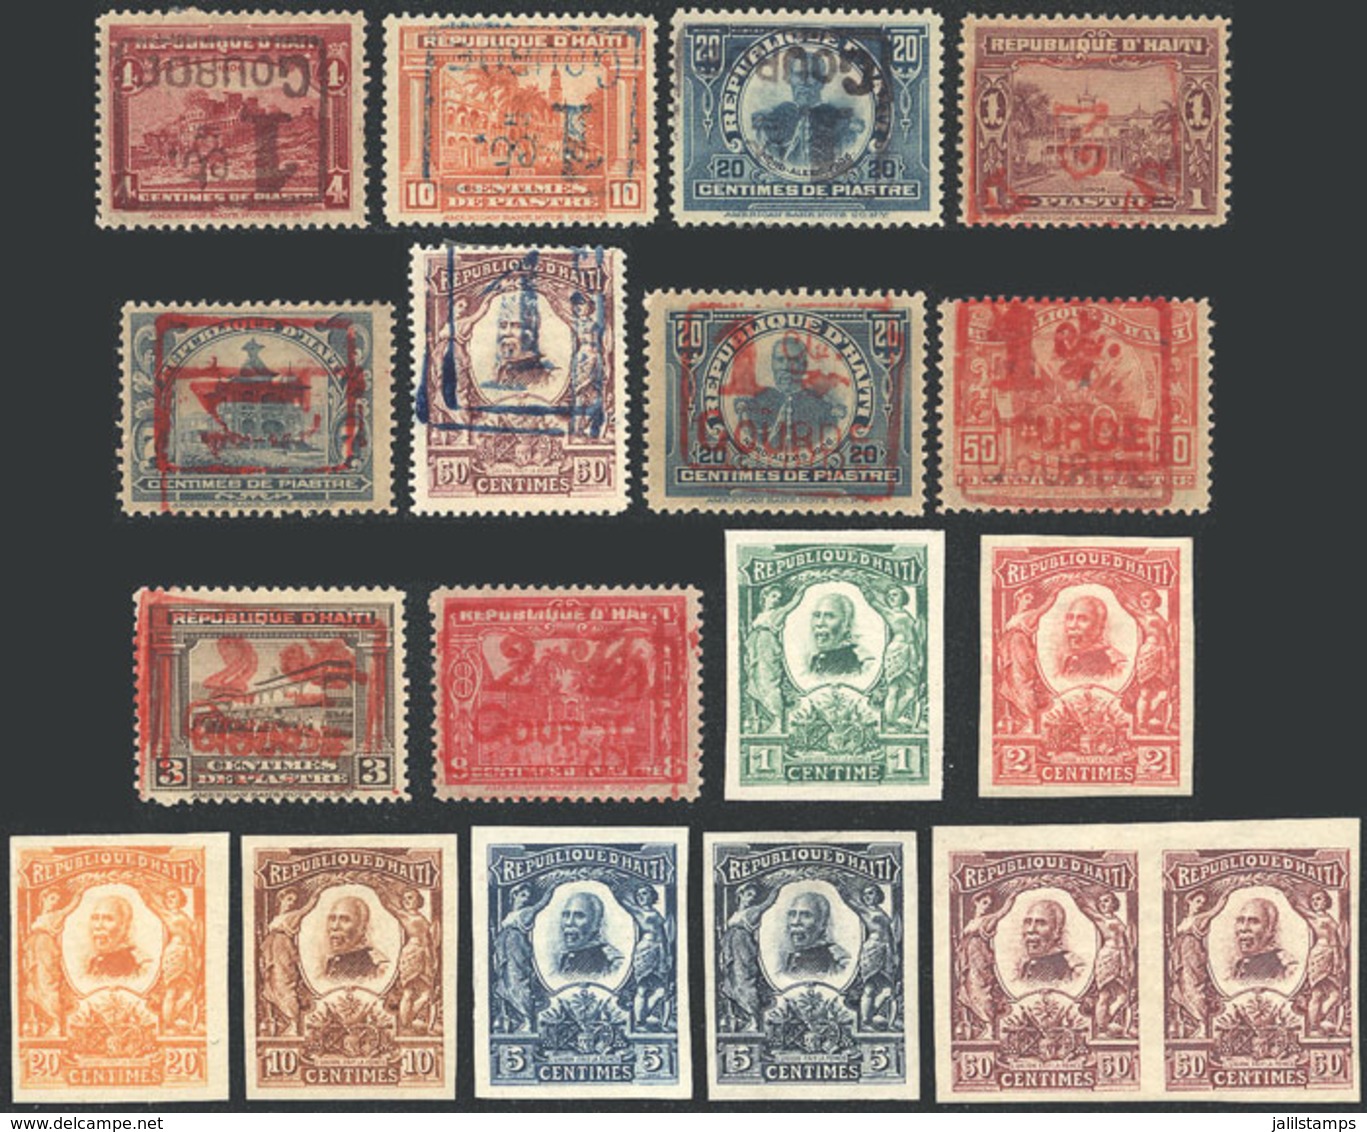 HAITI: Lot Of Old Stamps, Varieties, Several Imperforate, Inverted Surcharges, Etc., VF General Quality! - Haïti